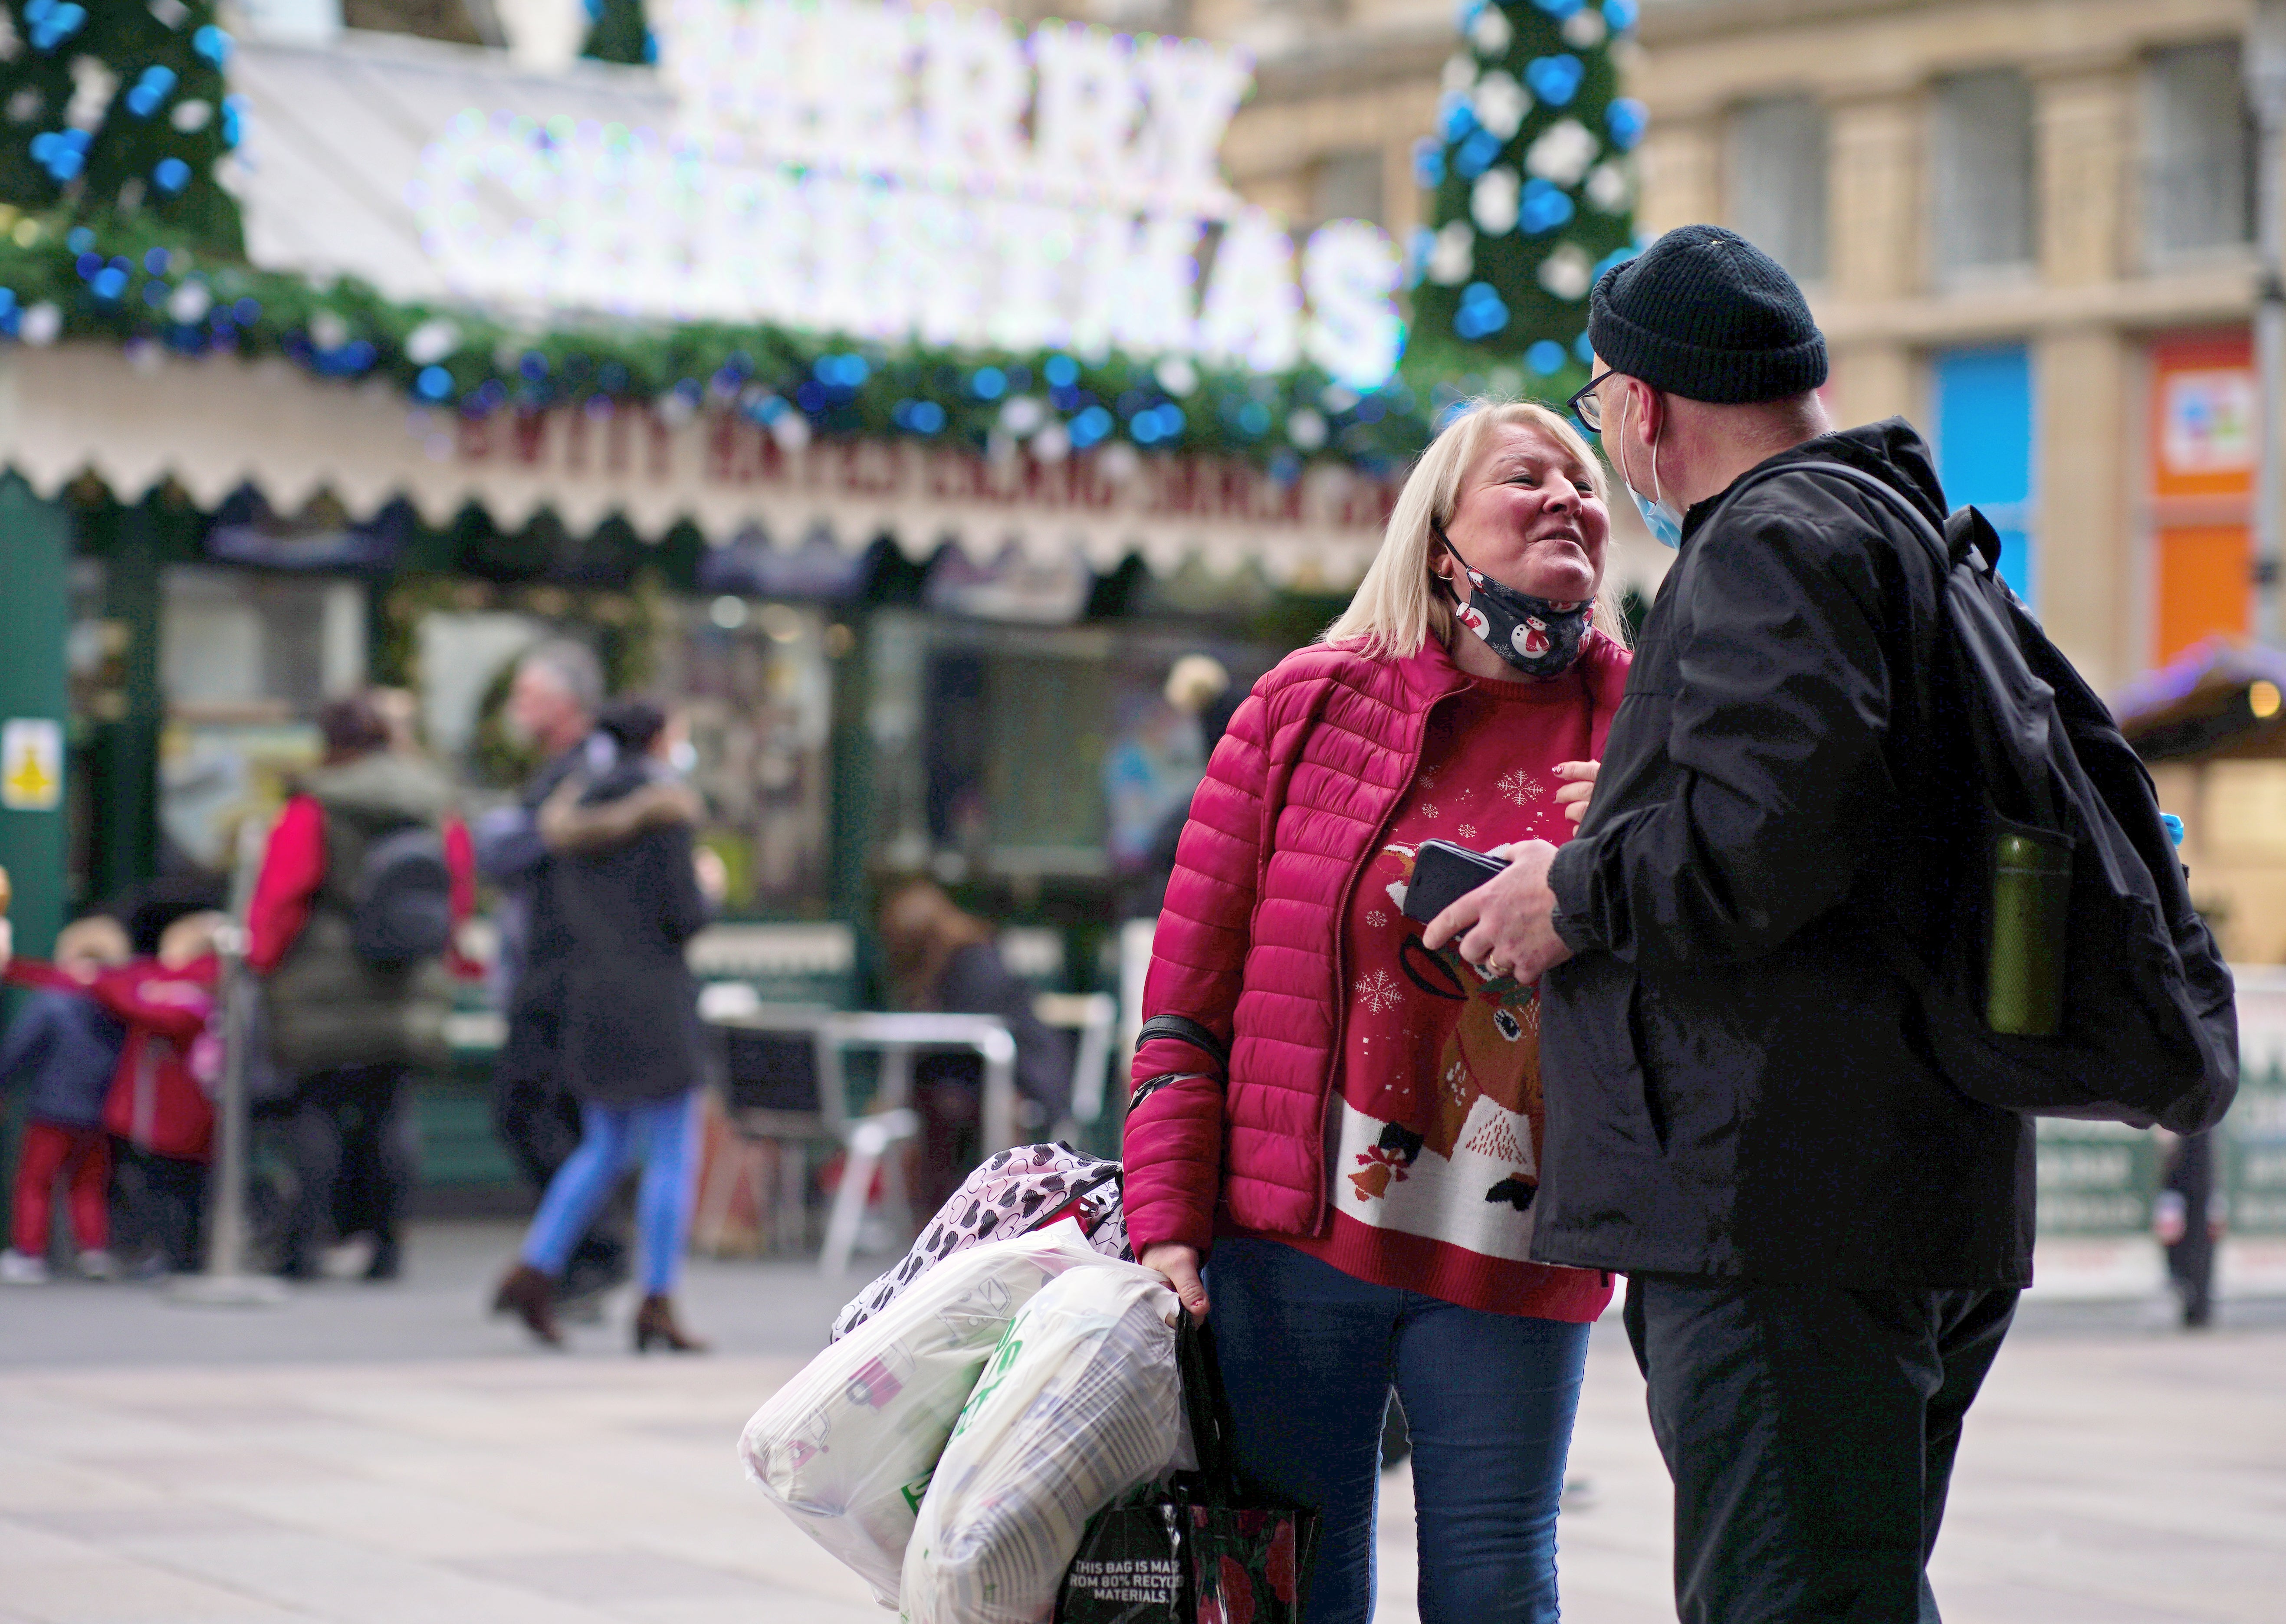 Christmas shoppers walk through the centre of Cardiff, Wales (Ben Birchall/PA)